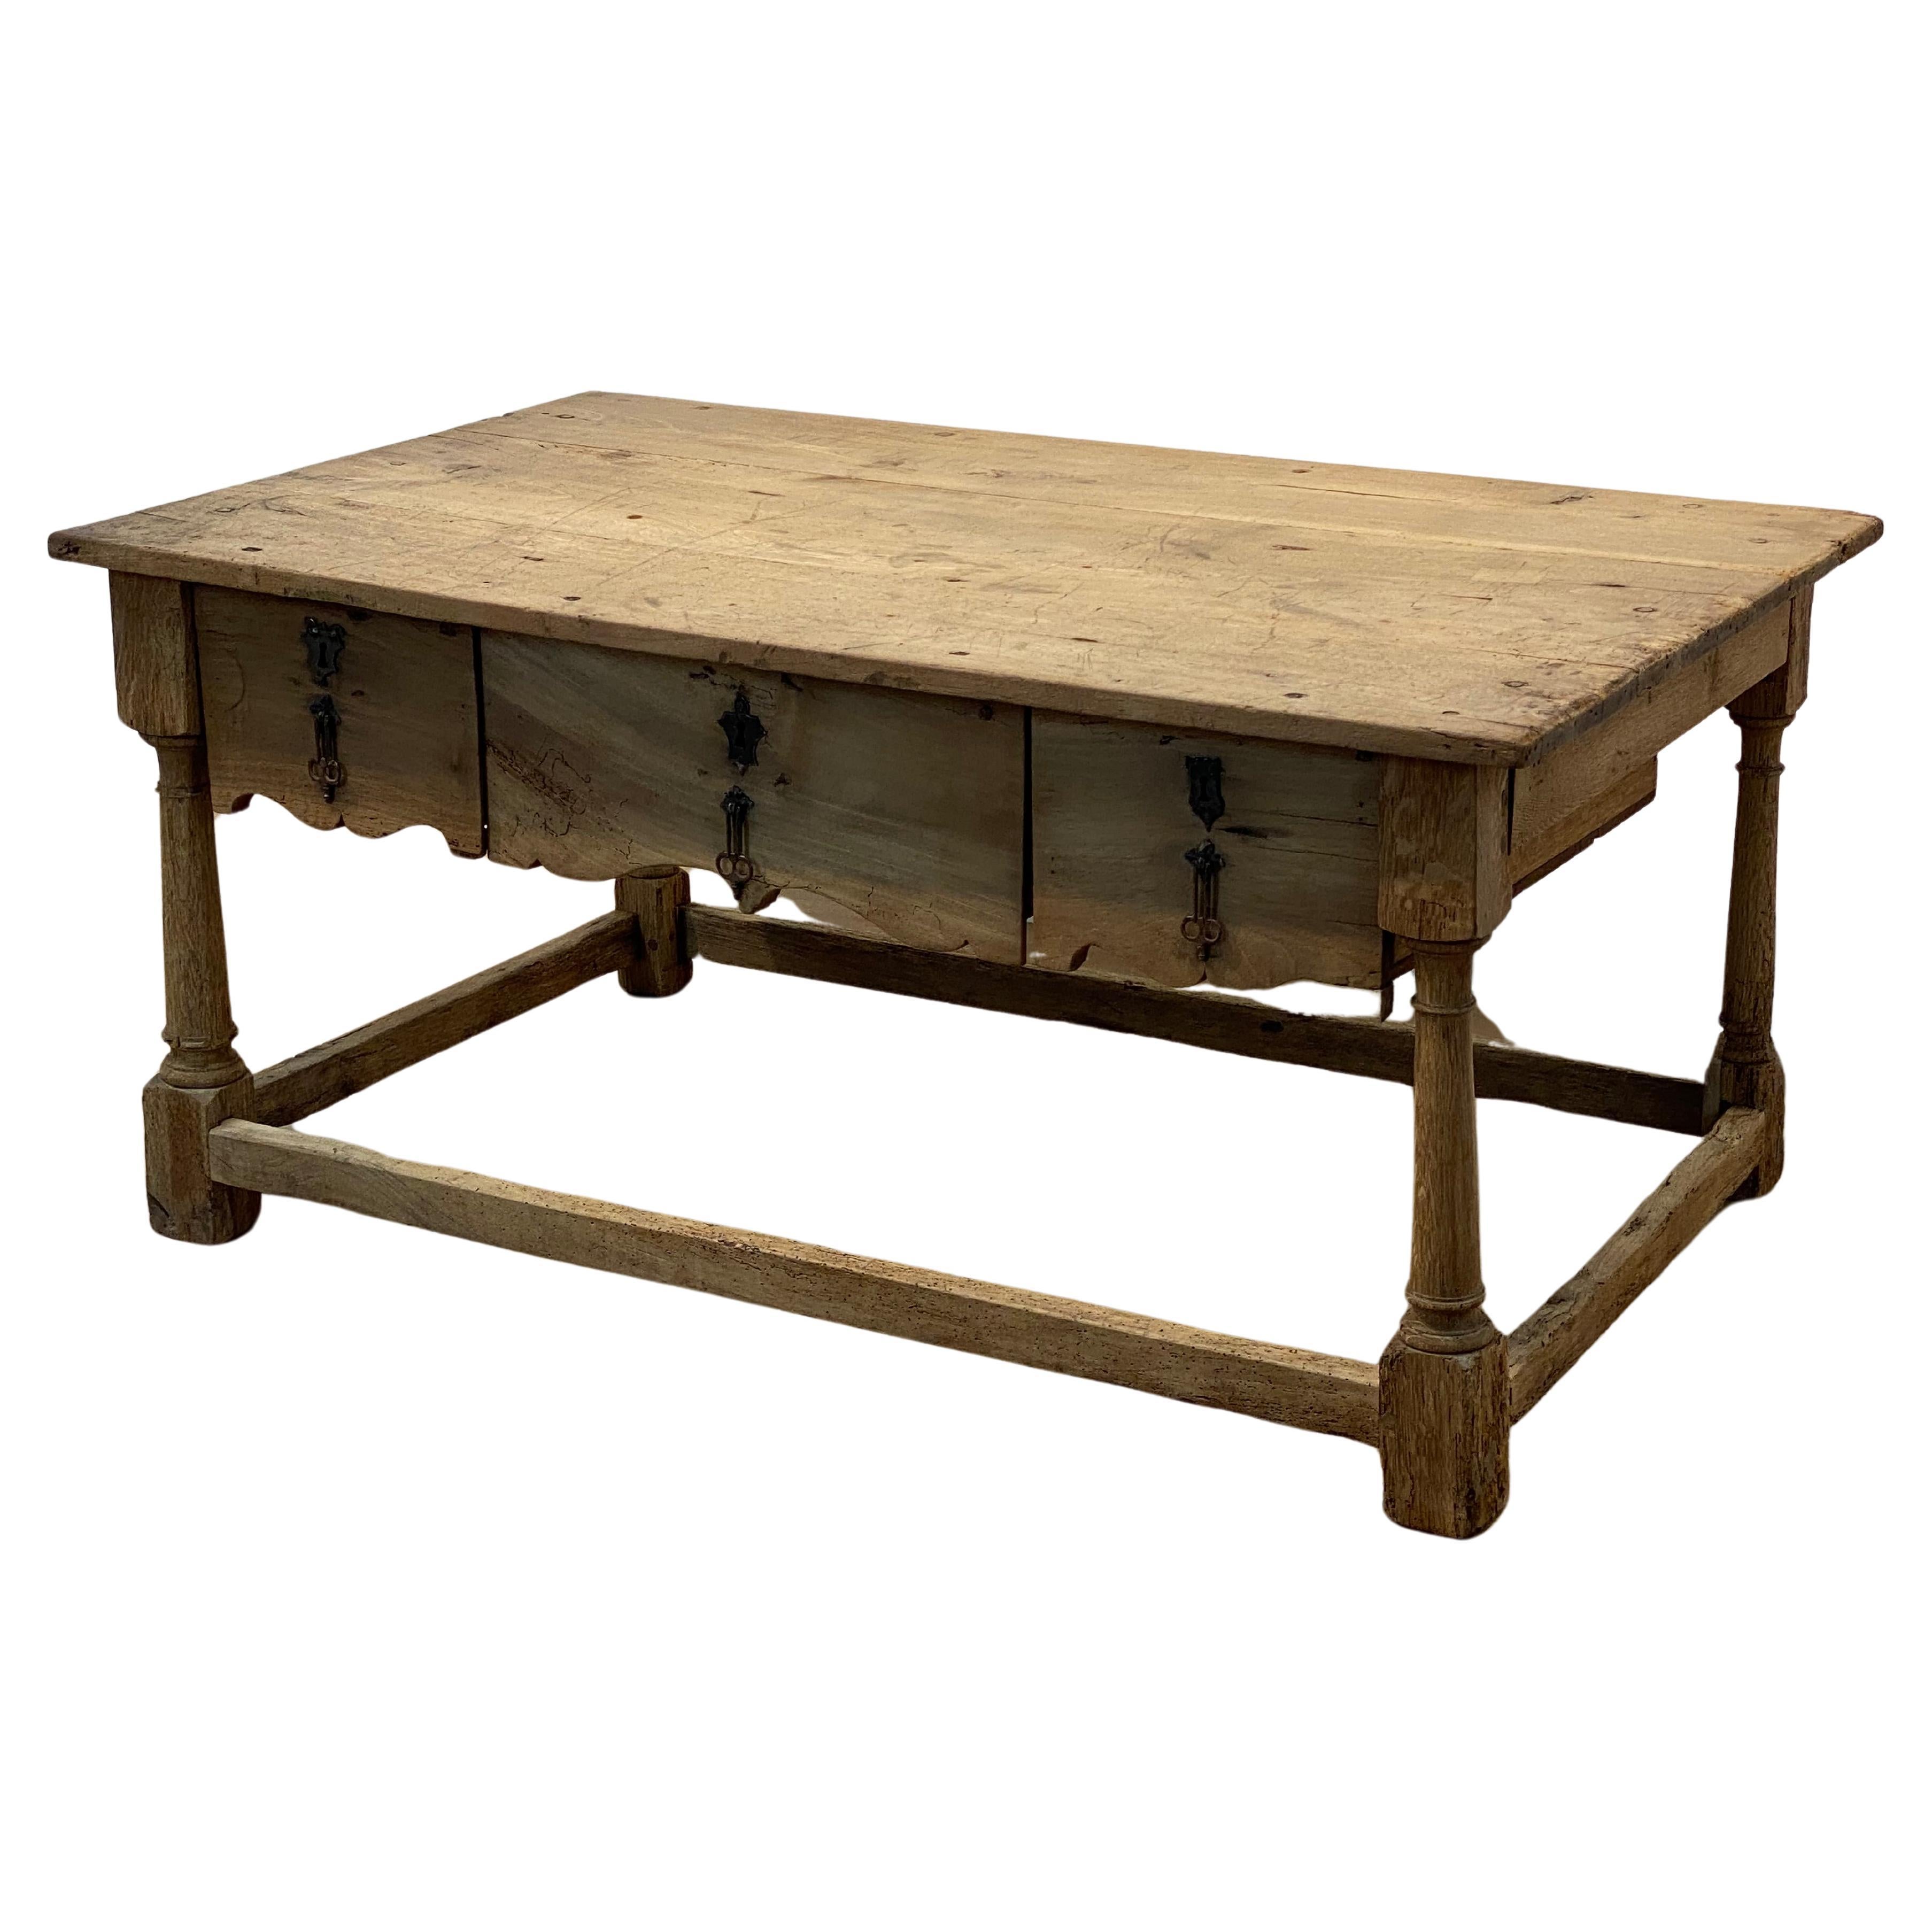 Antique Spanish Low Table with 3 drawers in Walnut, 18 th Century For Sale